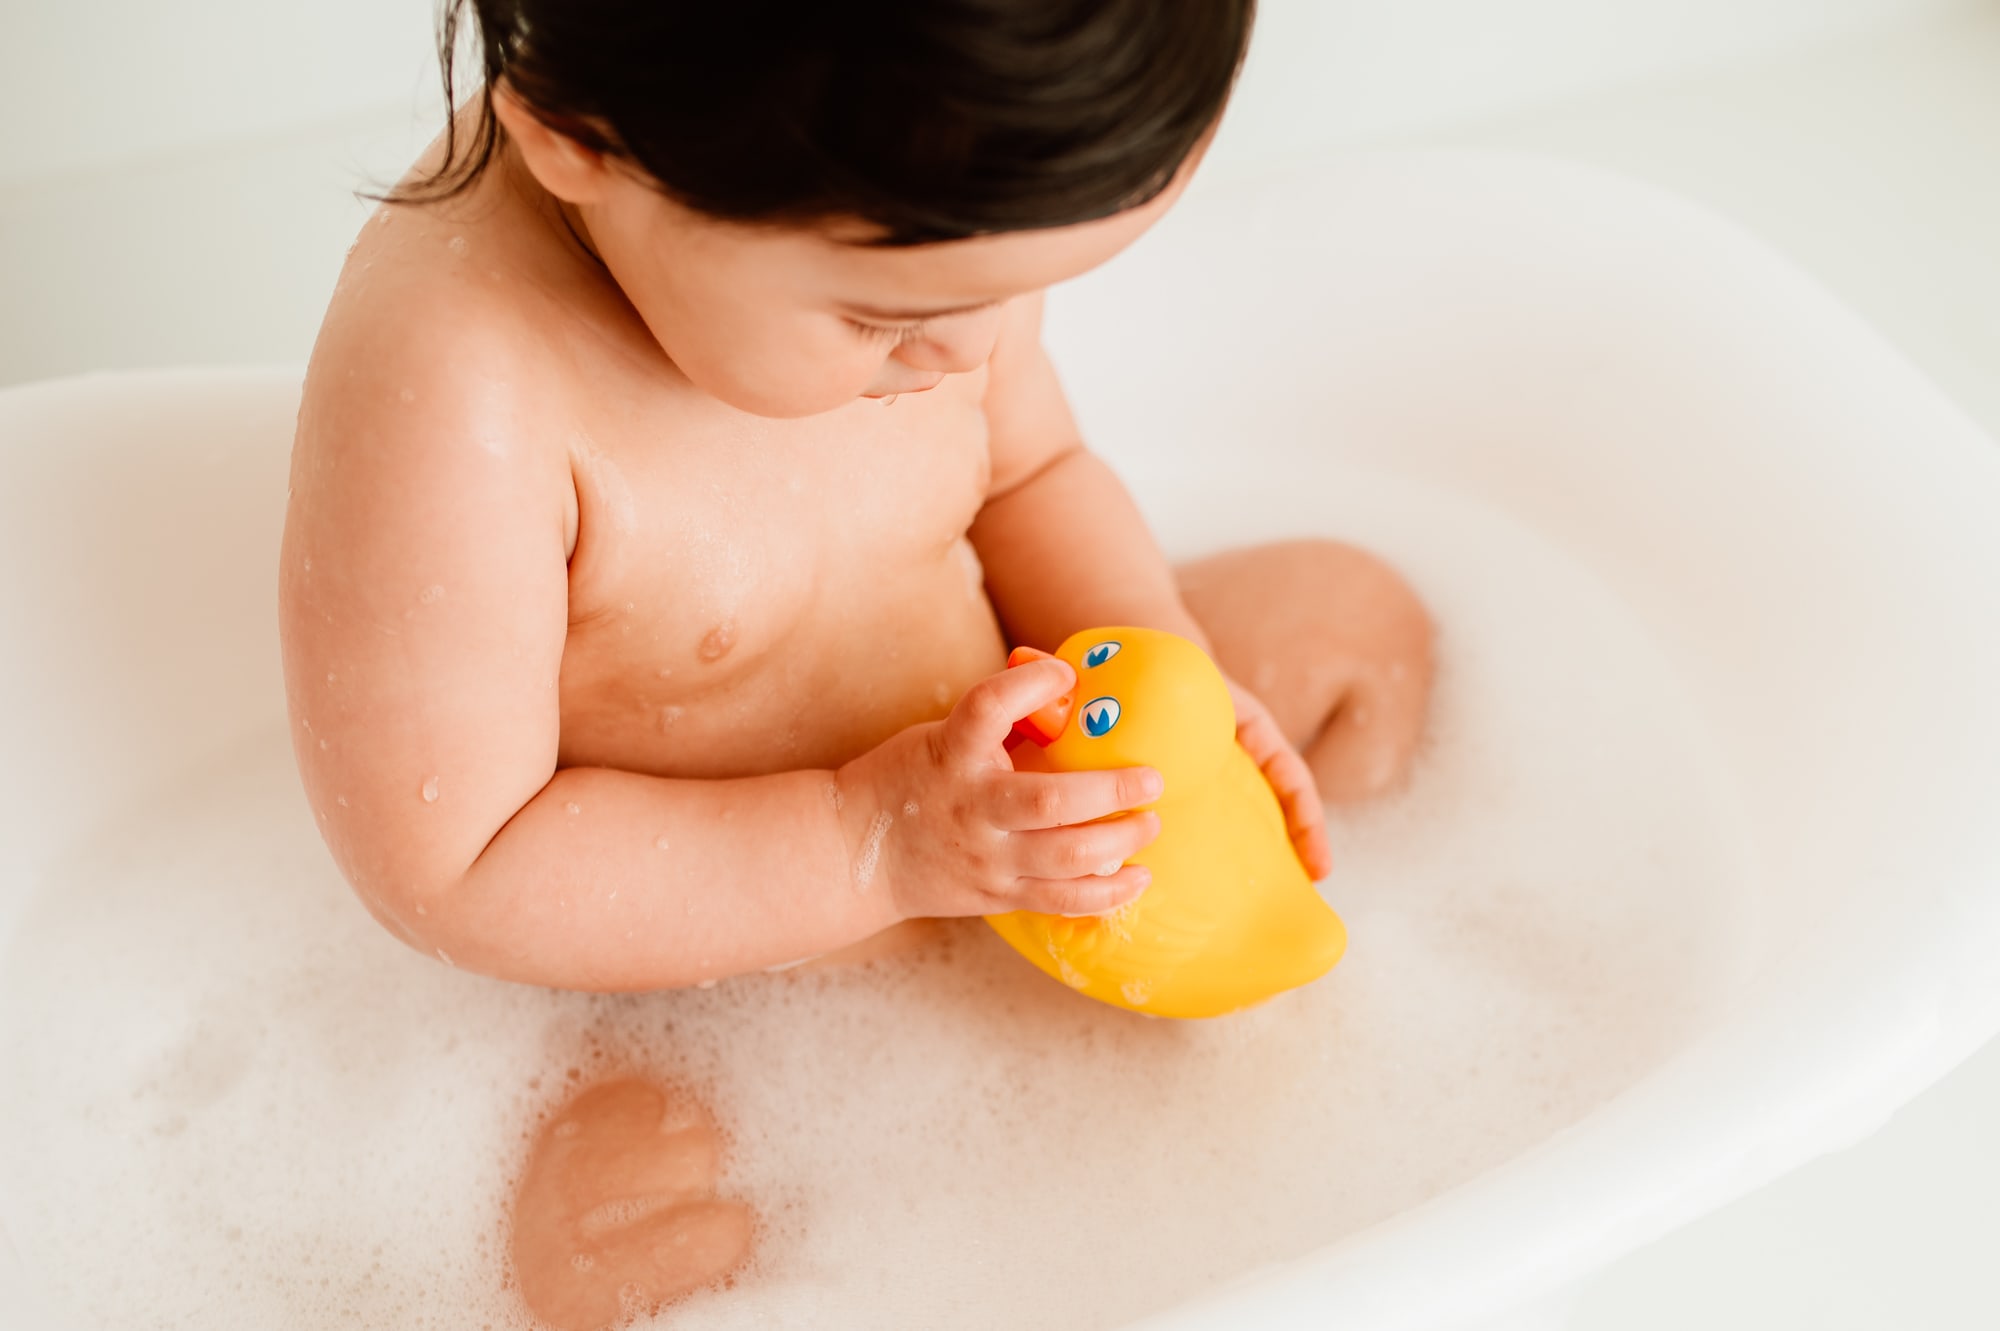 Child looks closely at rubber ducky during a bubble bath after their cake smash session.